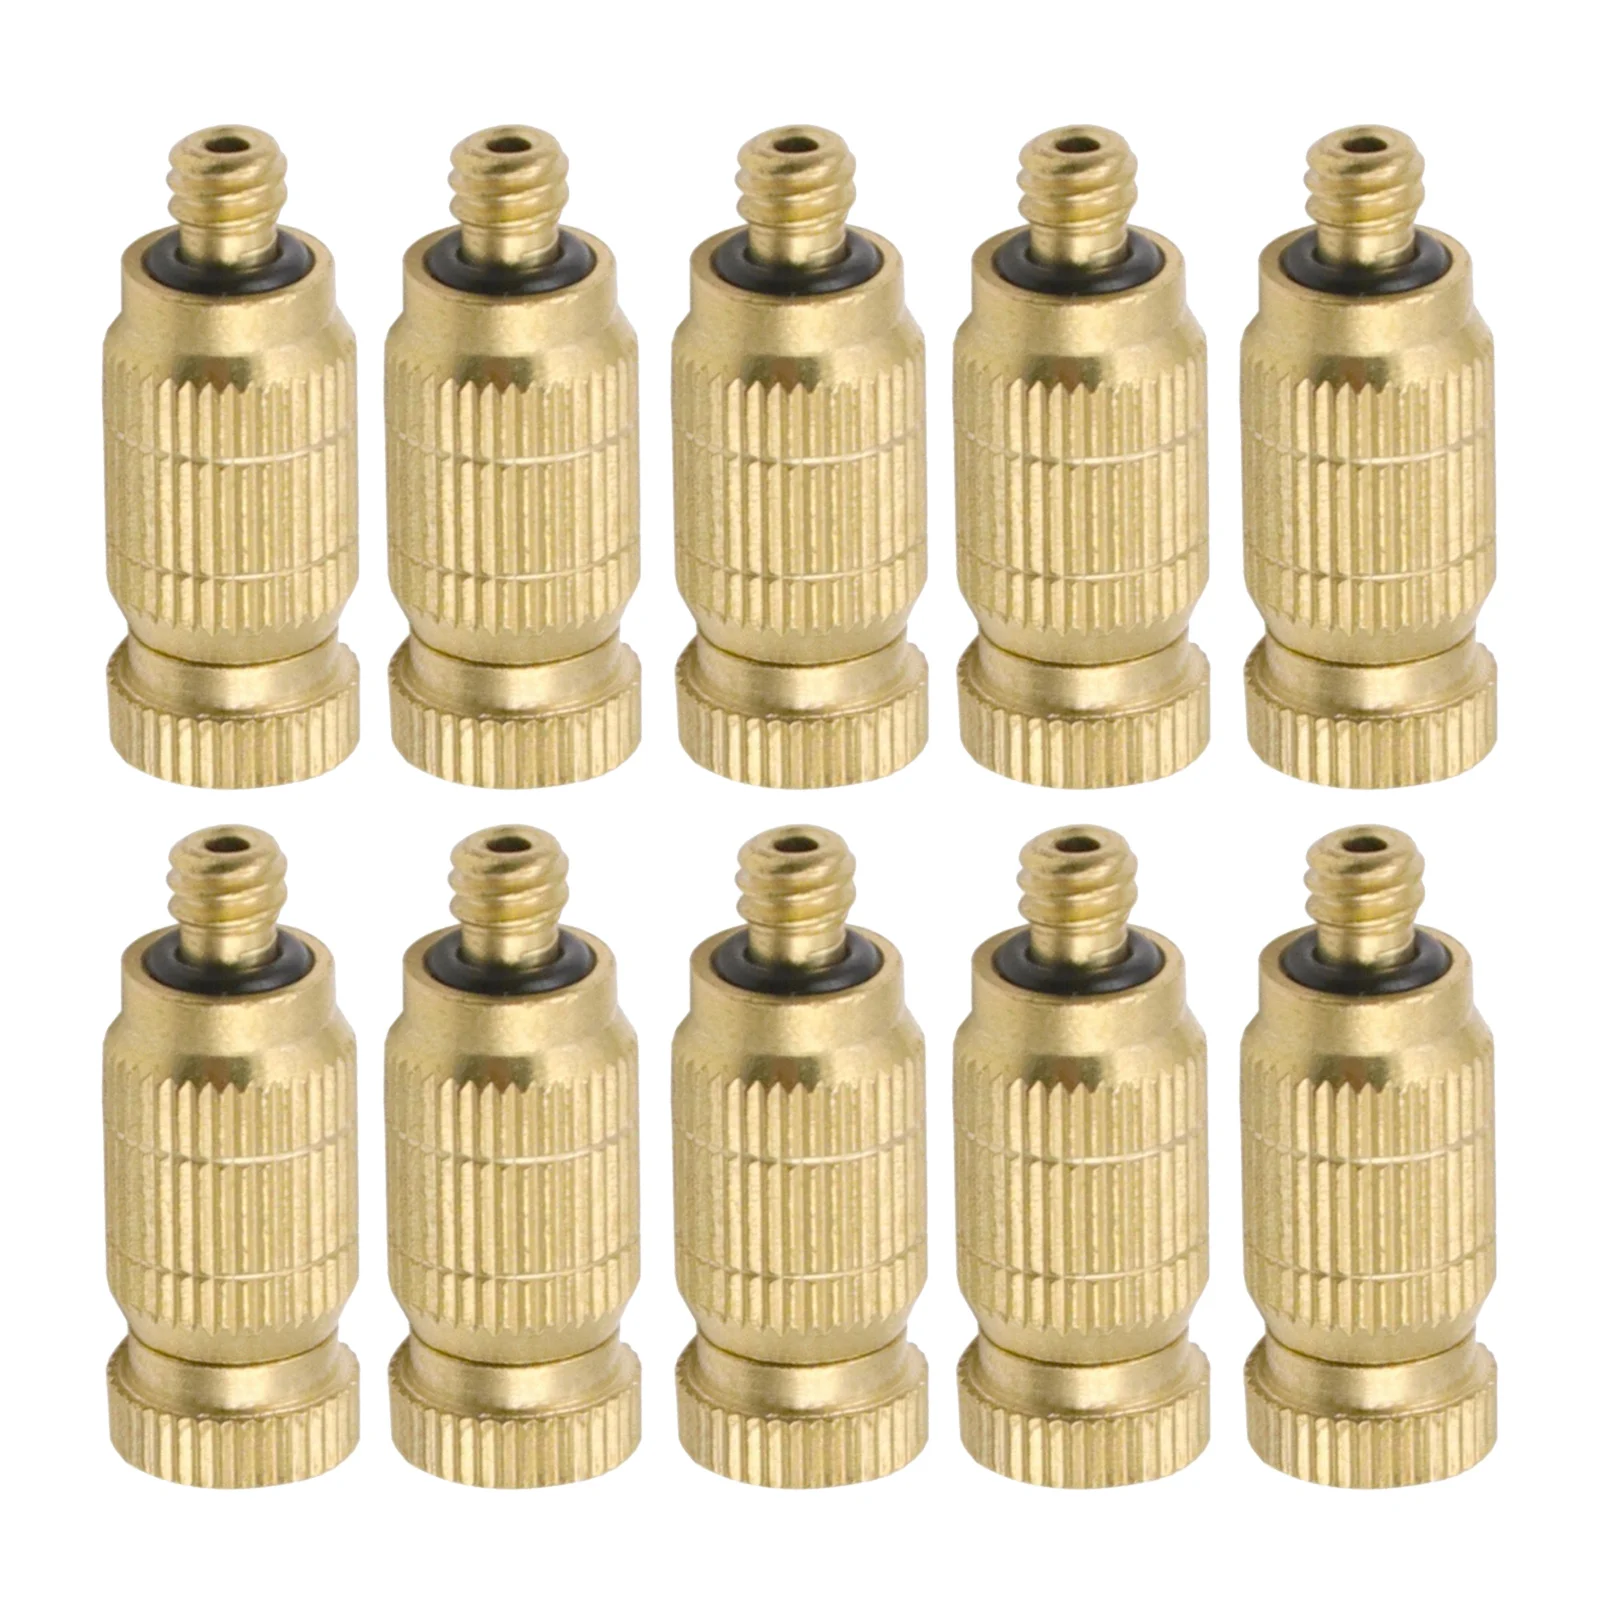 10-24unc Brass Misting Nozzle Garden Outdoor Cooling System Irrigation